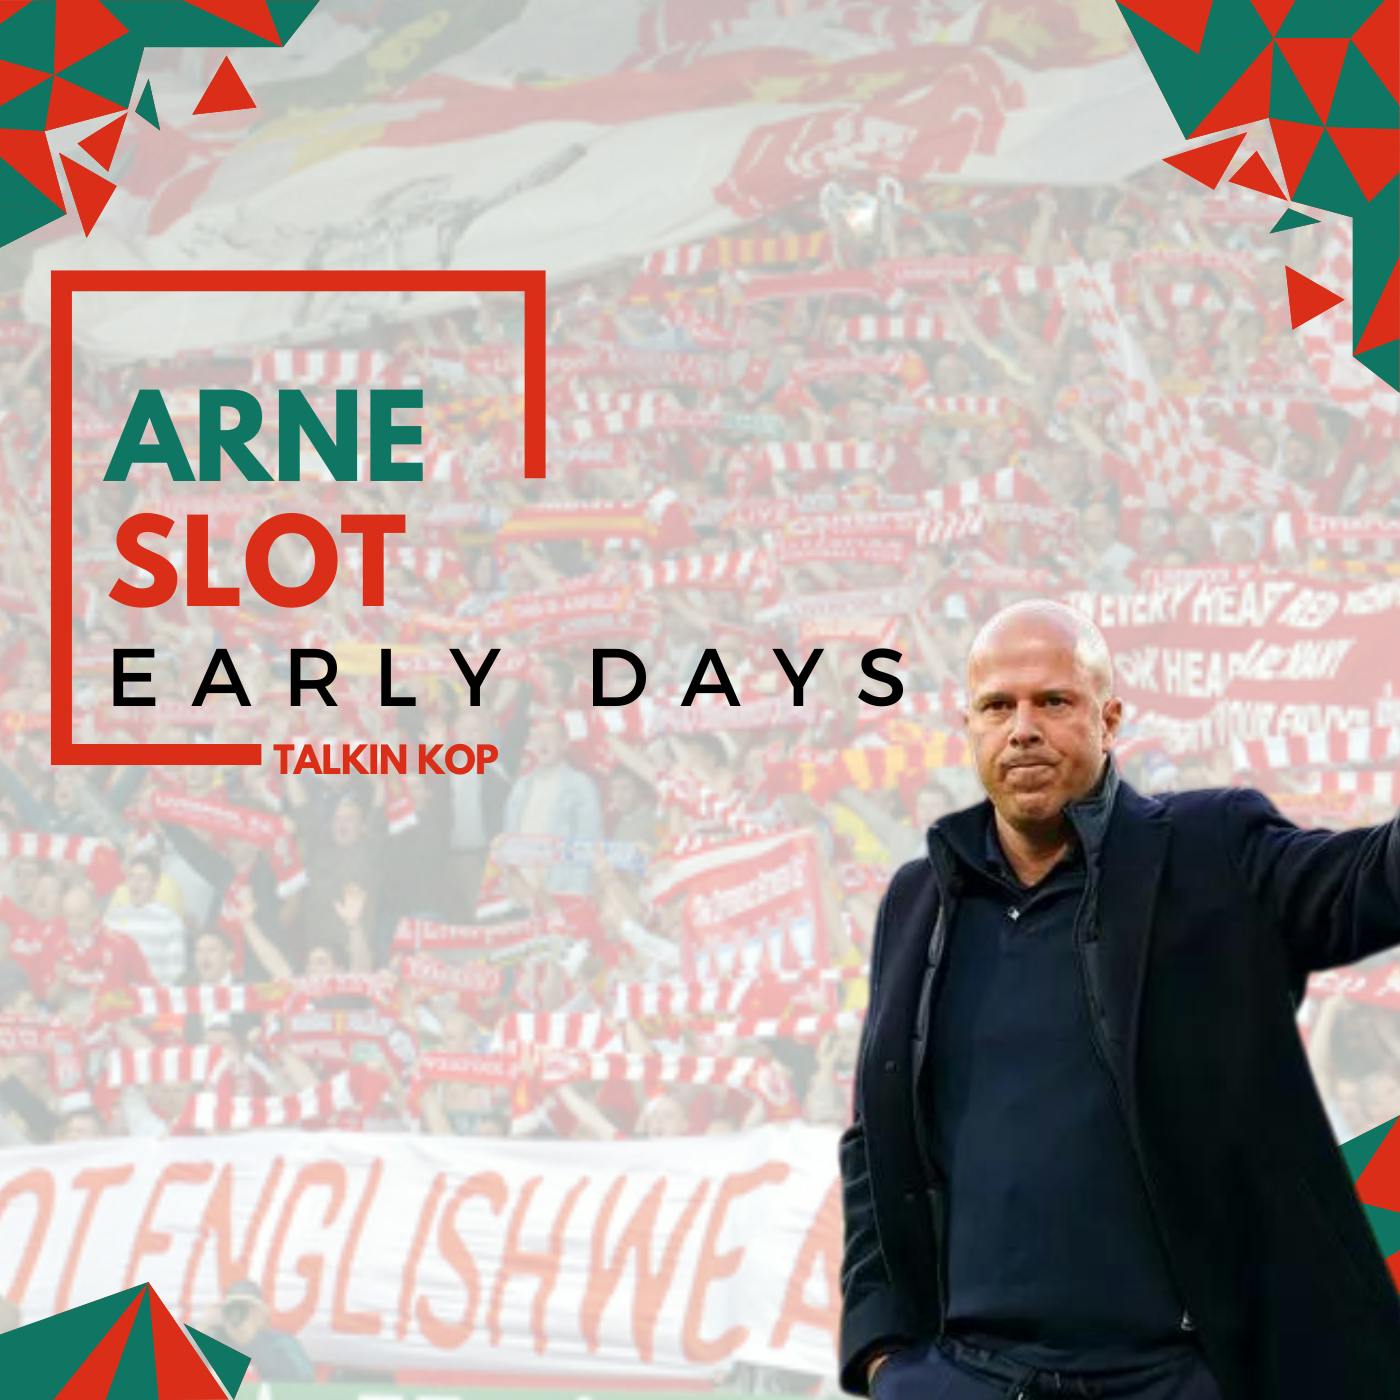 Arne Slot - Early Days | Liverpool's New Boss